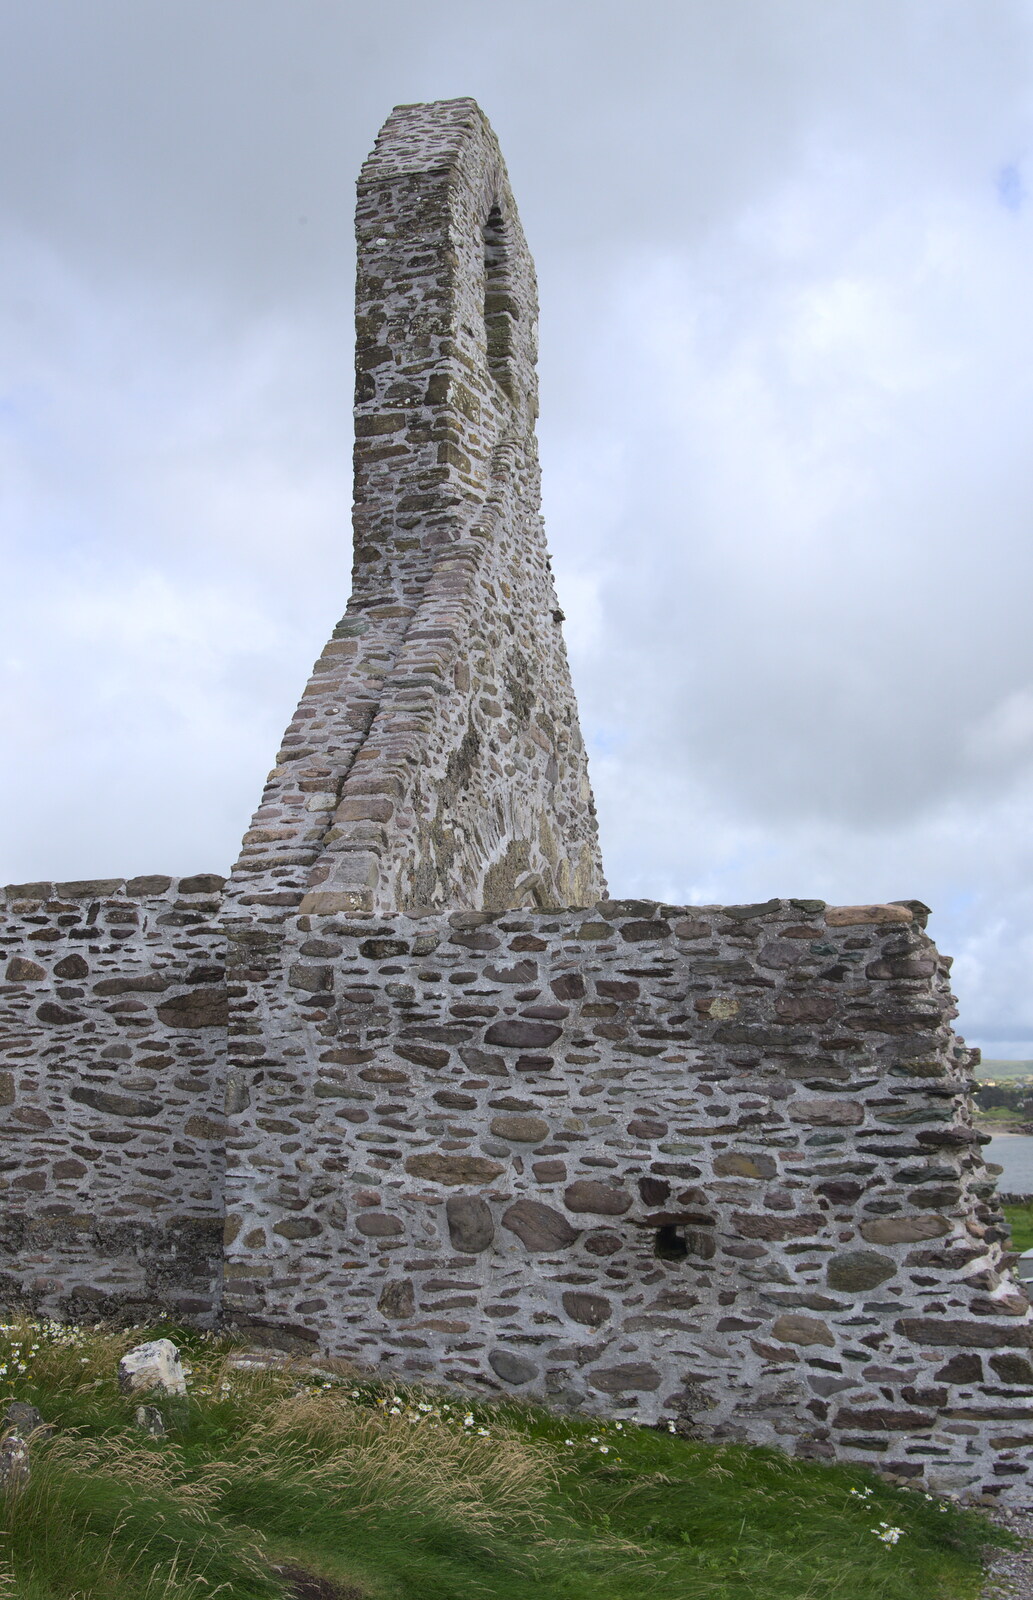 Ruined abbey remains from Baile an Sceilg to An tSnaidhme, Co. Kerry, Ireland - 31st July 2017